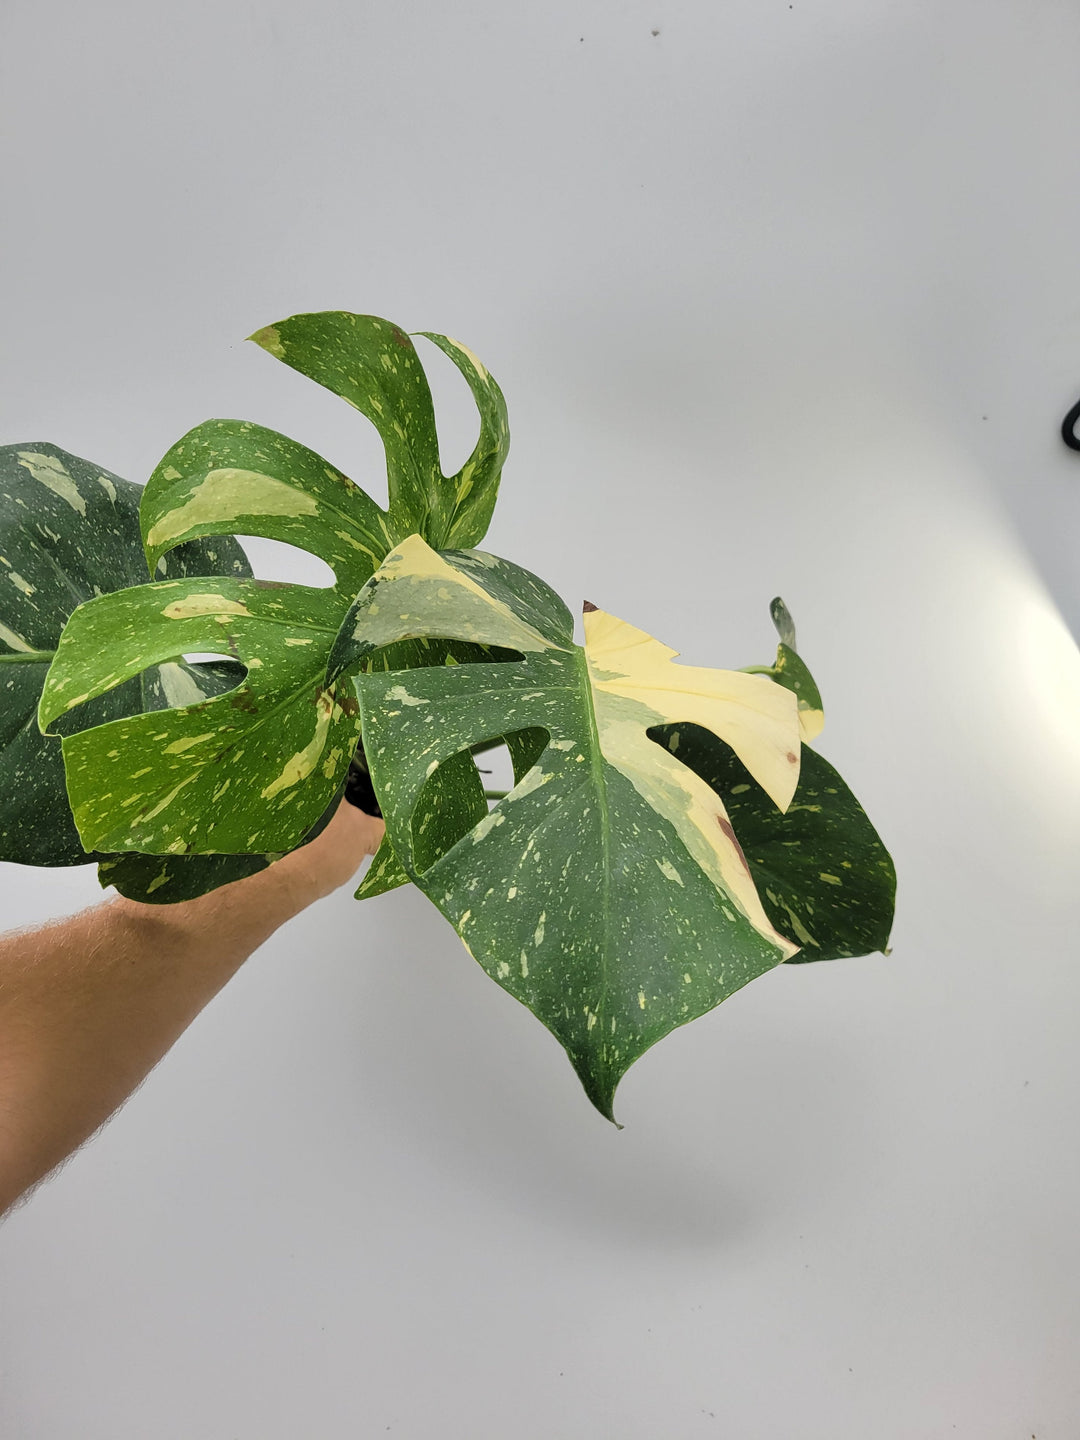 Monstera Thai Constellation, Nice XL size,  Highly variegated, Japanese Cultivar, exact plant pictured  US Seller #T9